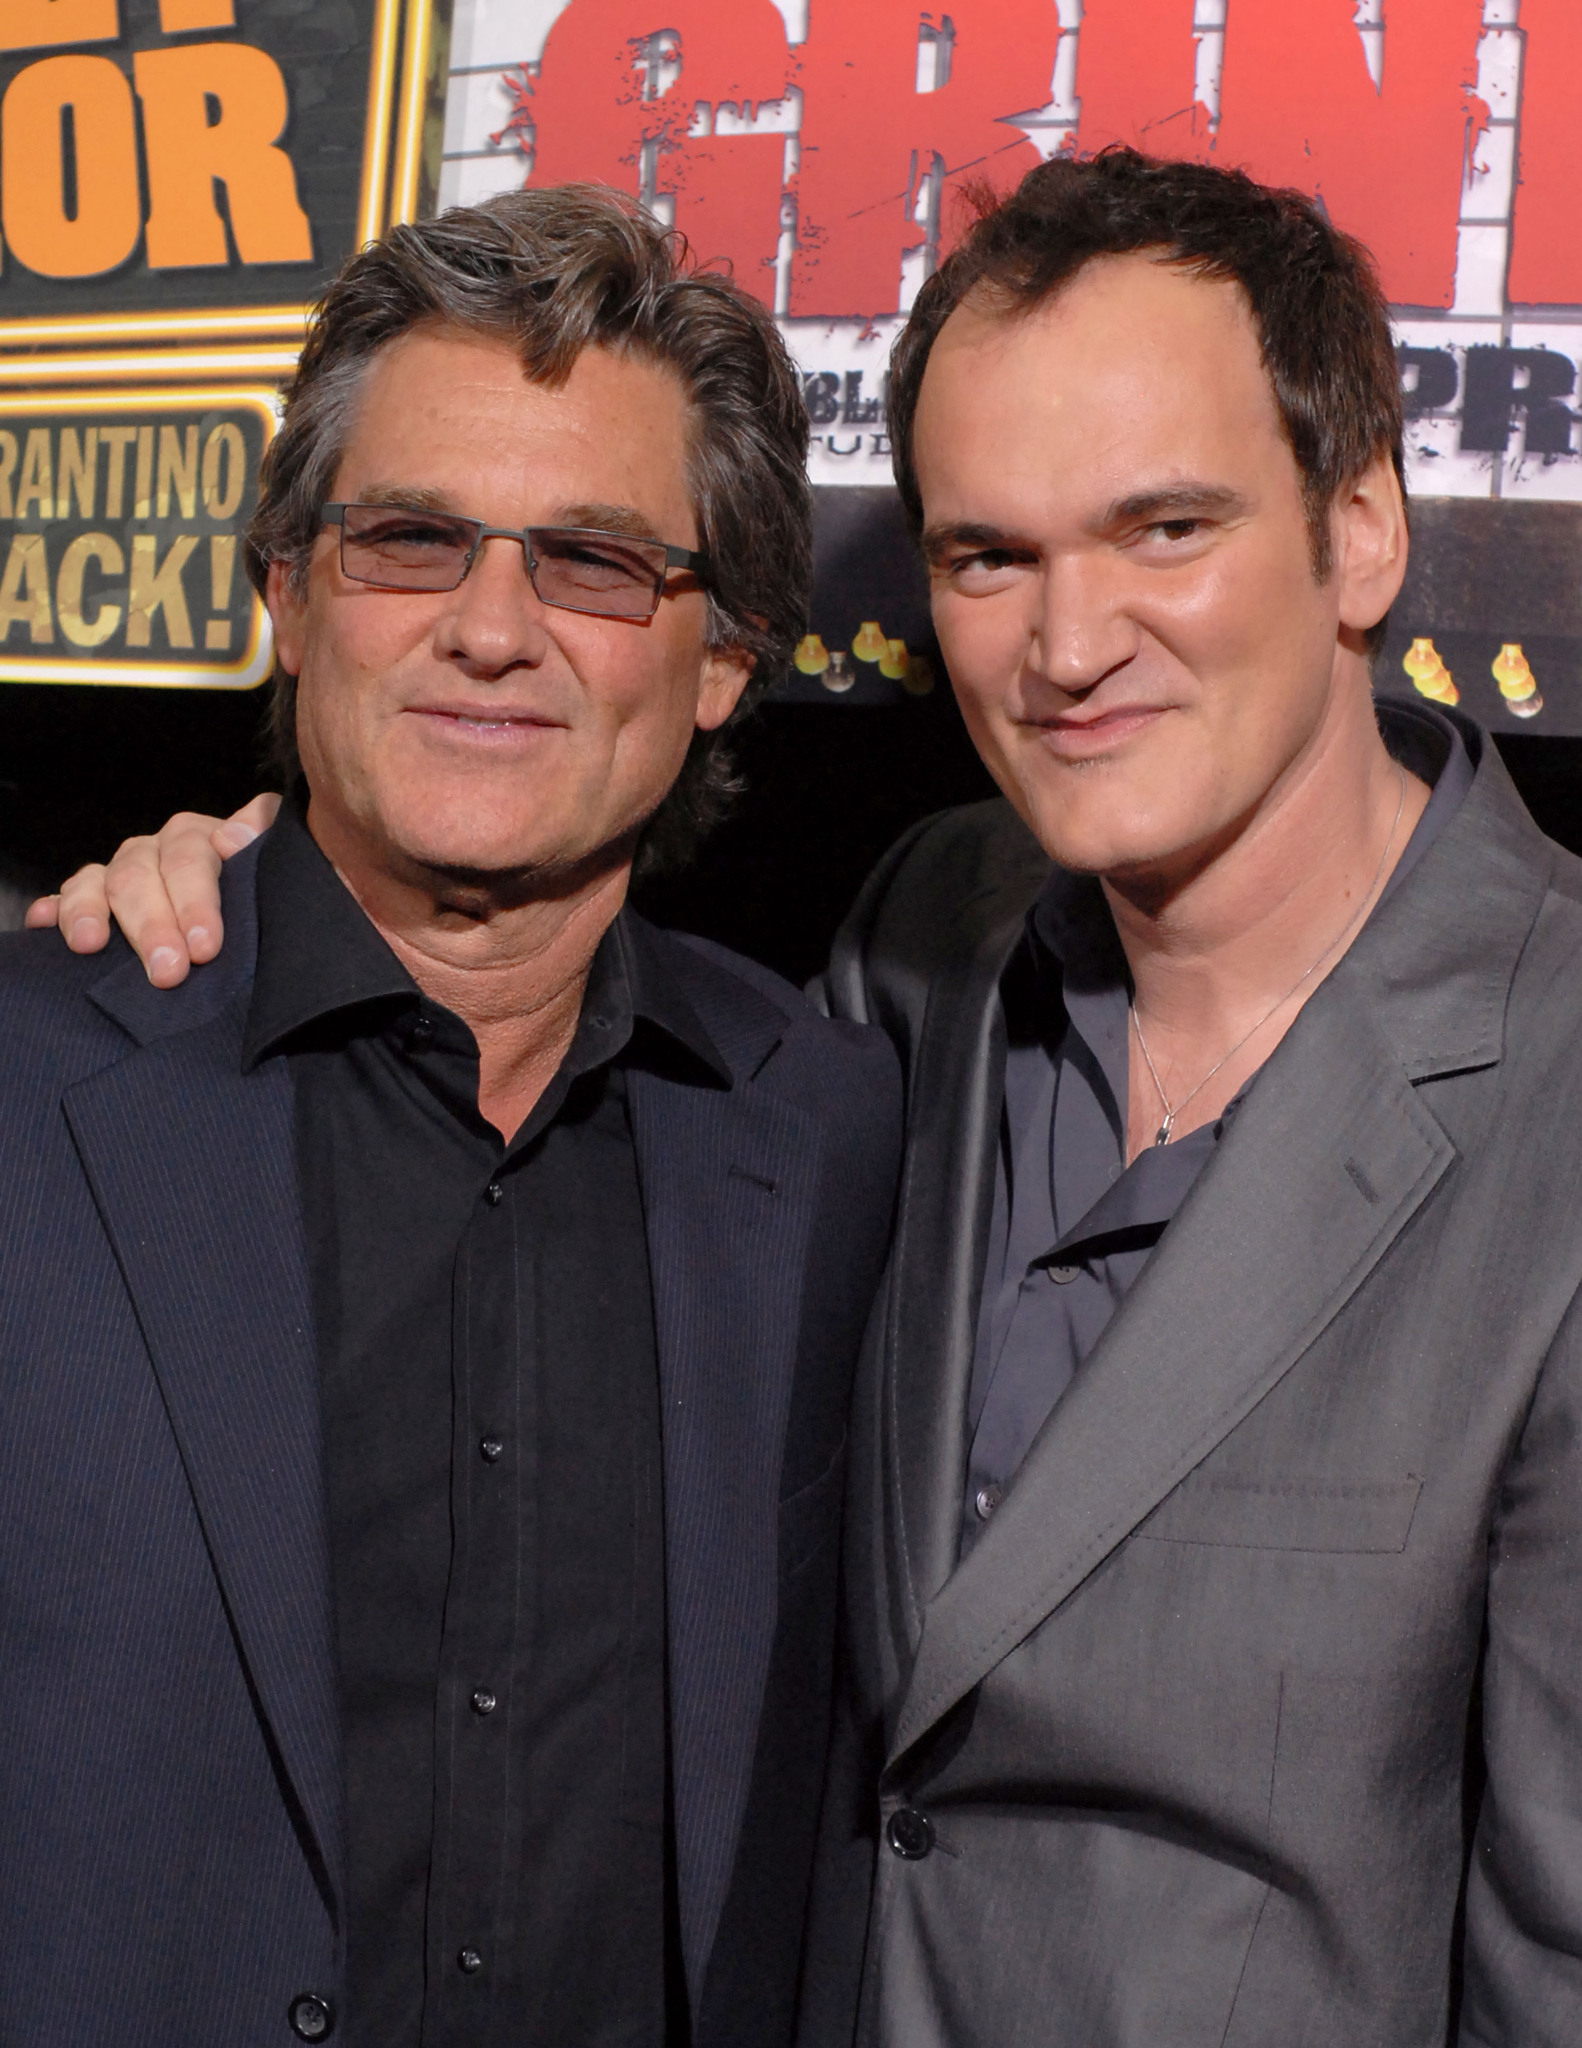 Quentin Tarantino and Kurt Russell at event of Death Proof (2007)